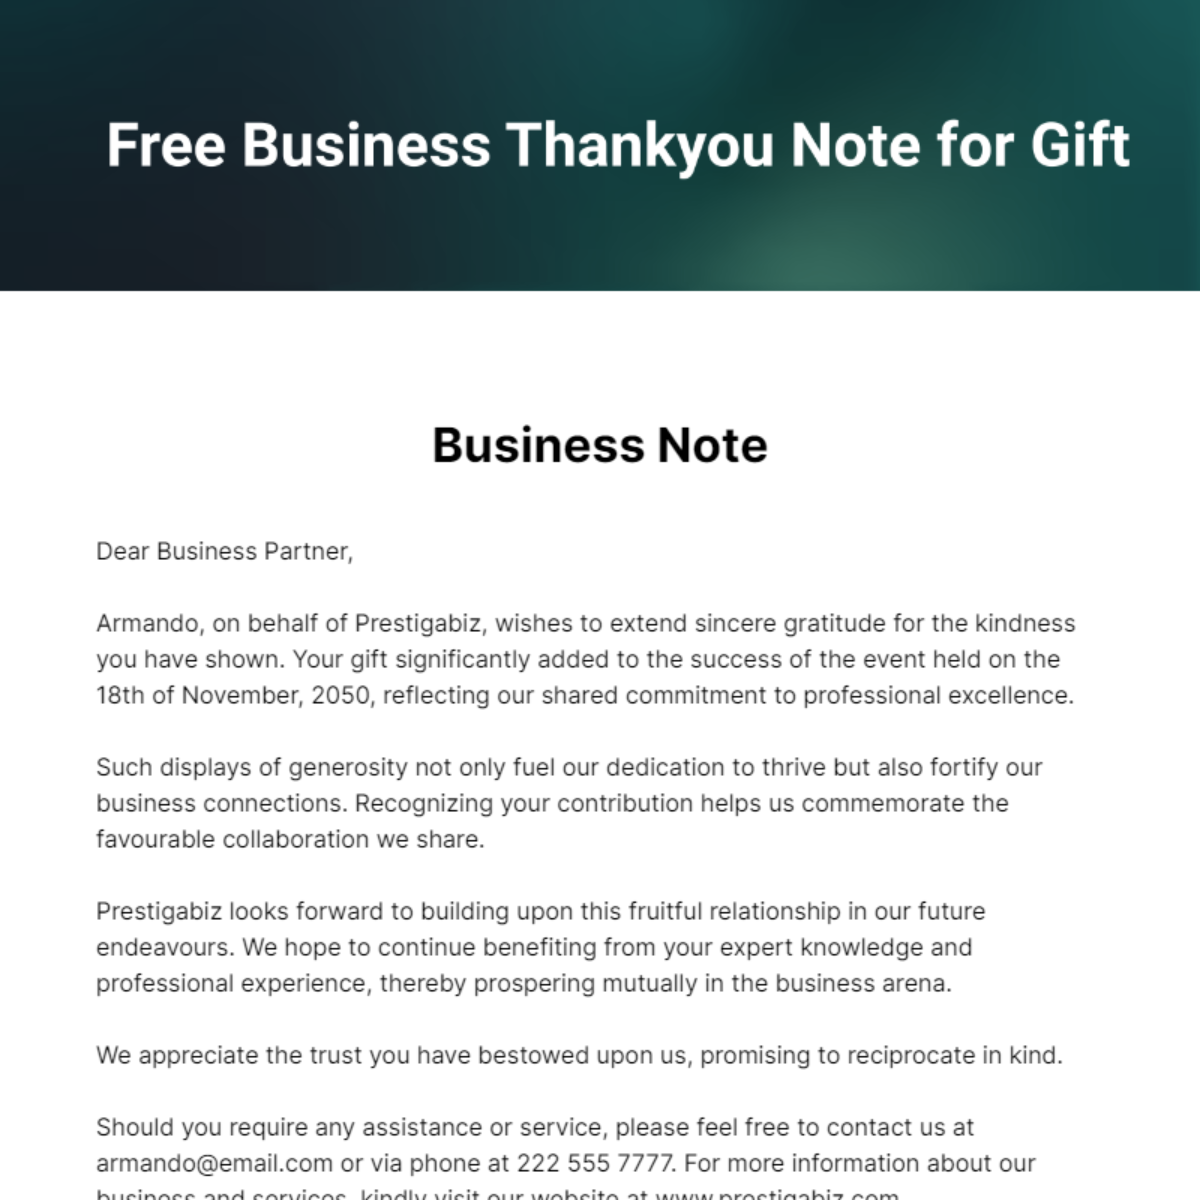 Free Business Thankyou Note for Gift Template